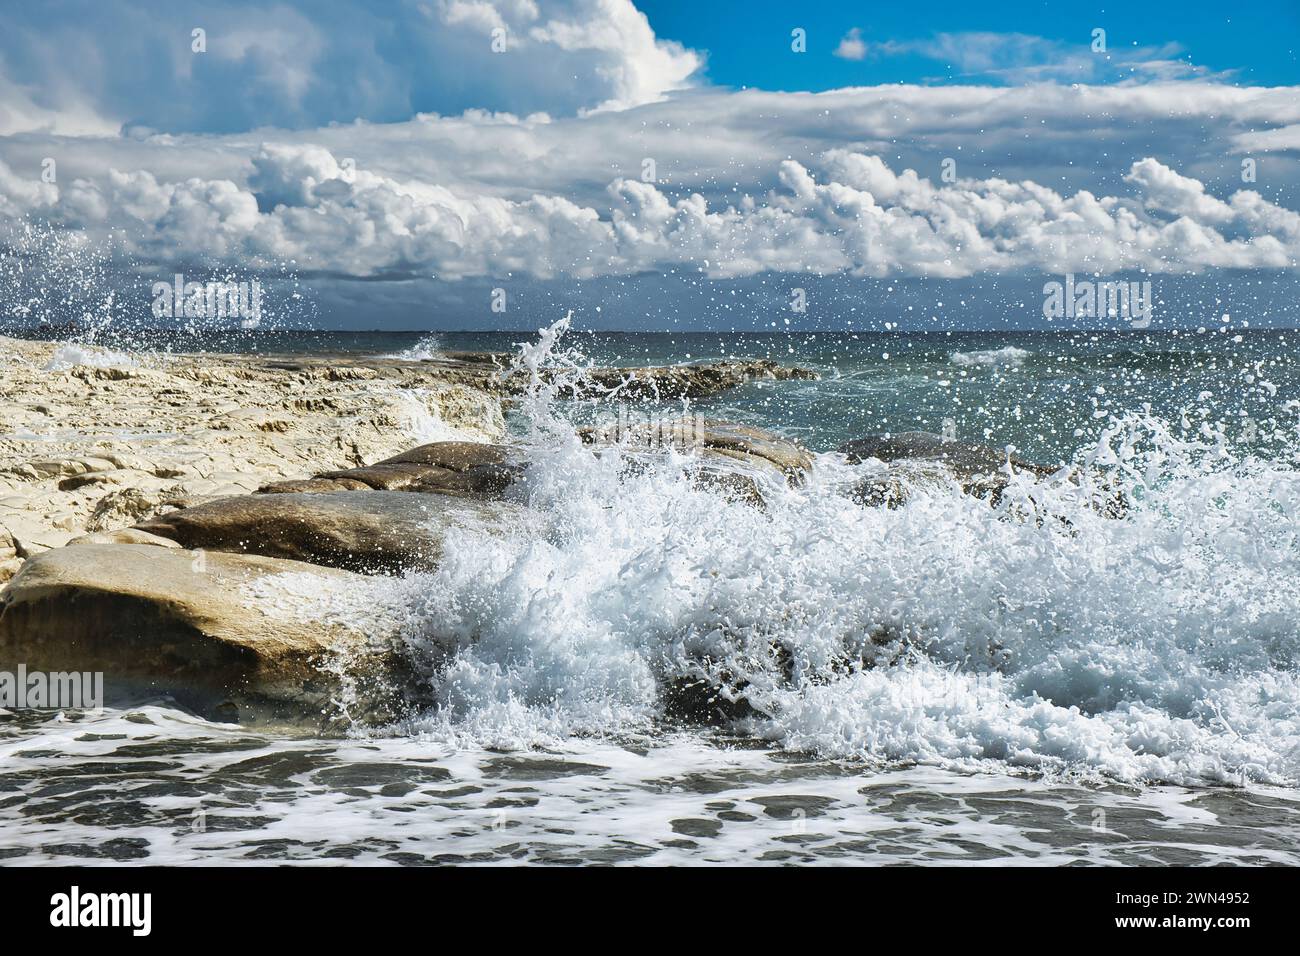 Waves crashing on a rocky coast. Impressive cloudscape with threatening thunderclouds and blue sky. South coast of Cyprus. Stock Photo